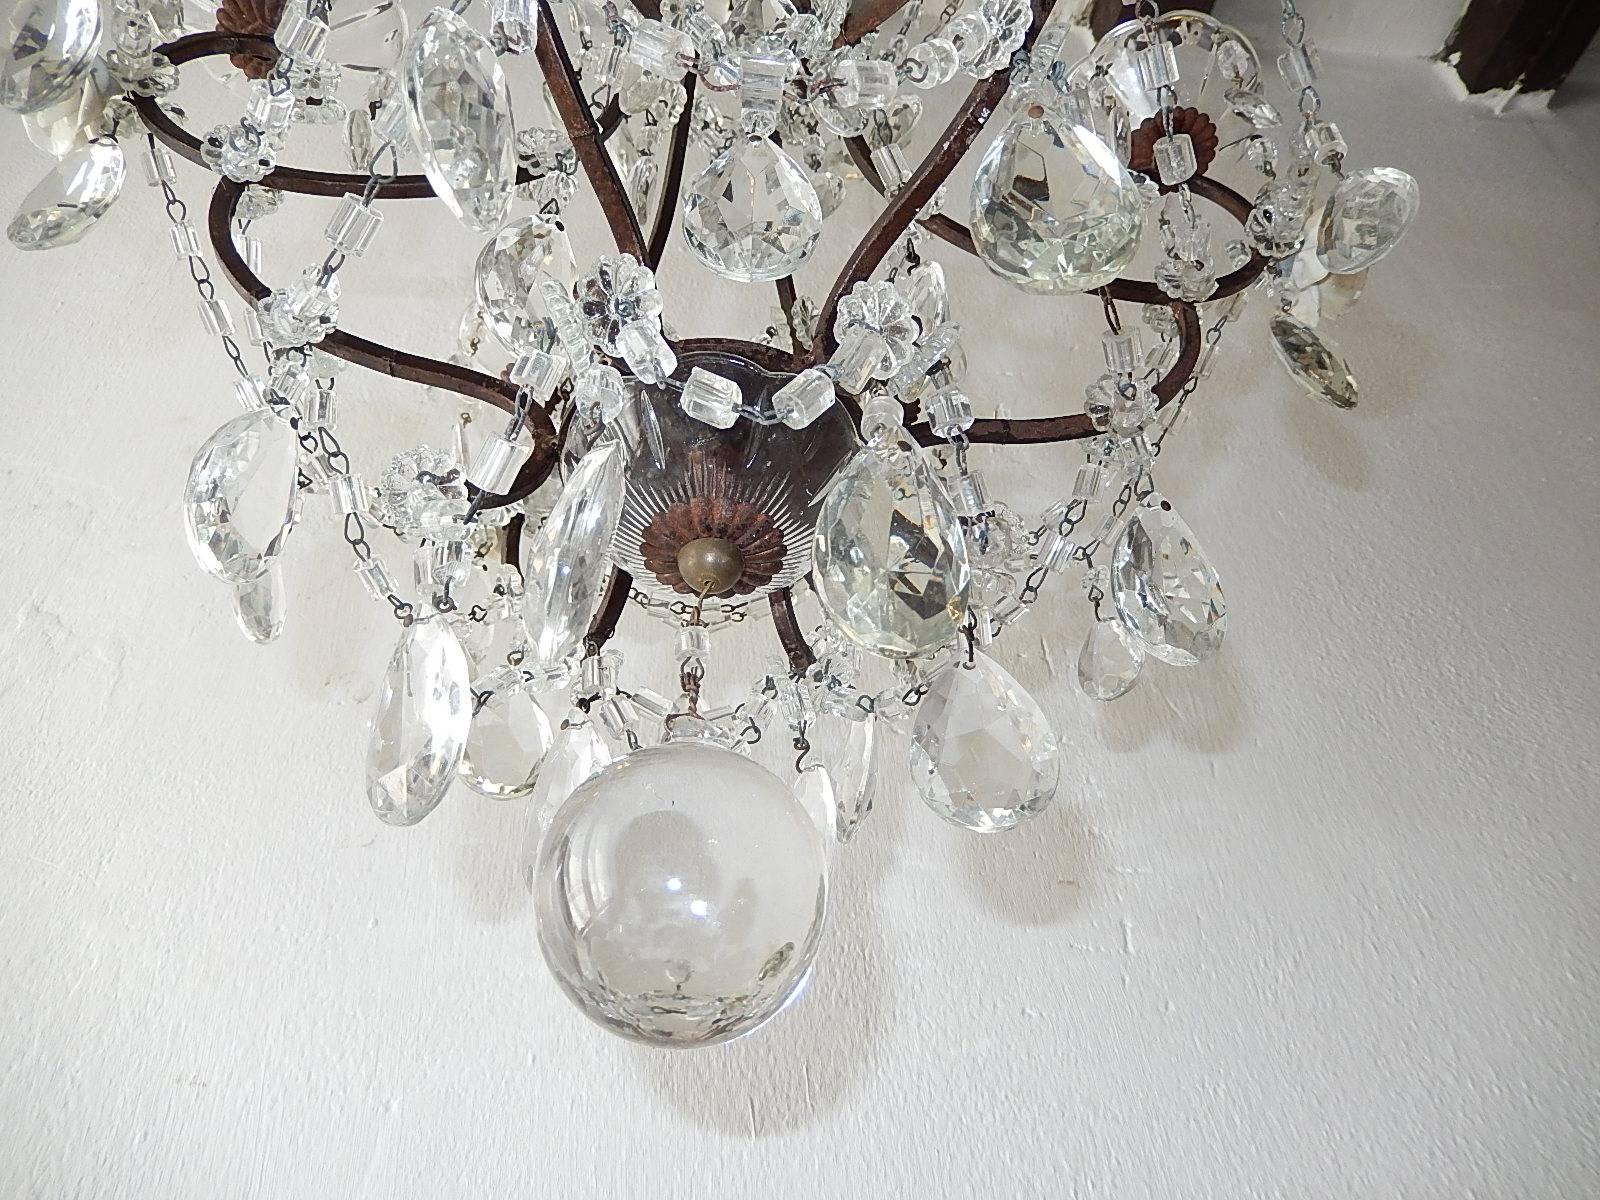 Early 20th Century 1920 French Elegant Crystal Prisms and Swags with White Roses Chandelier